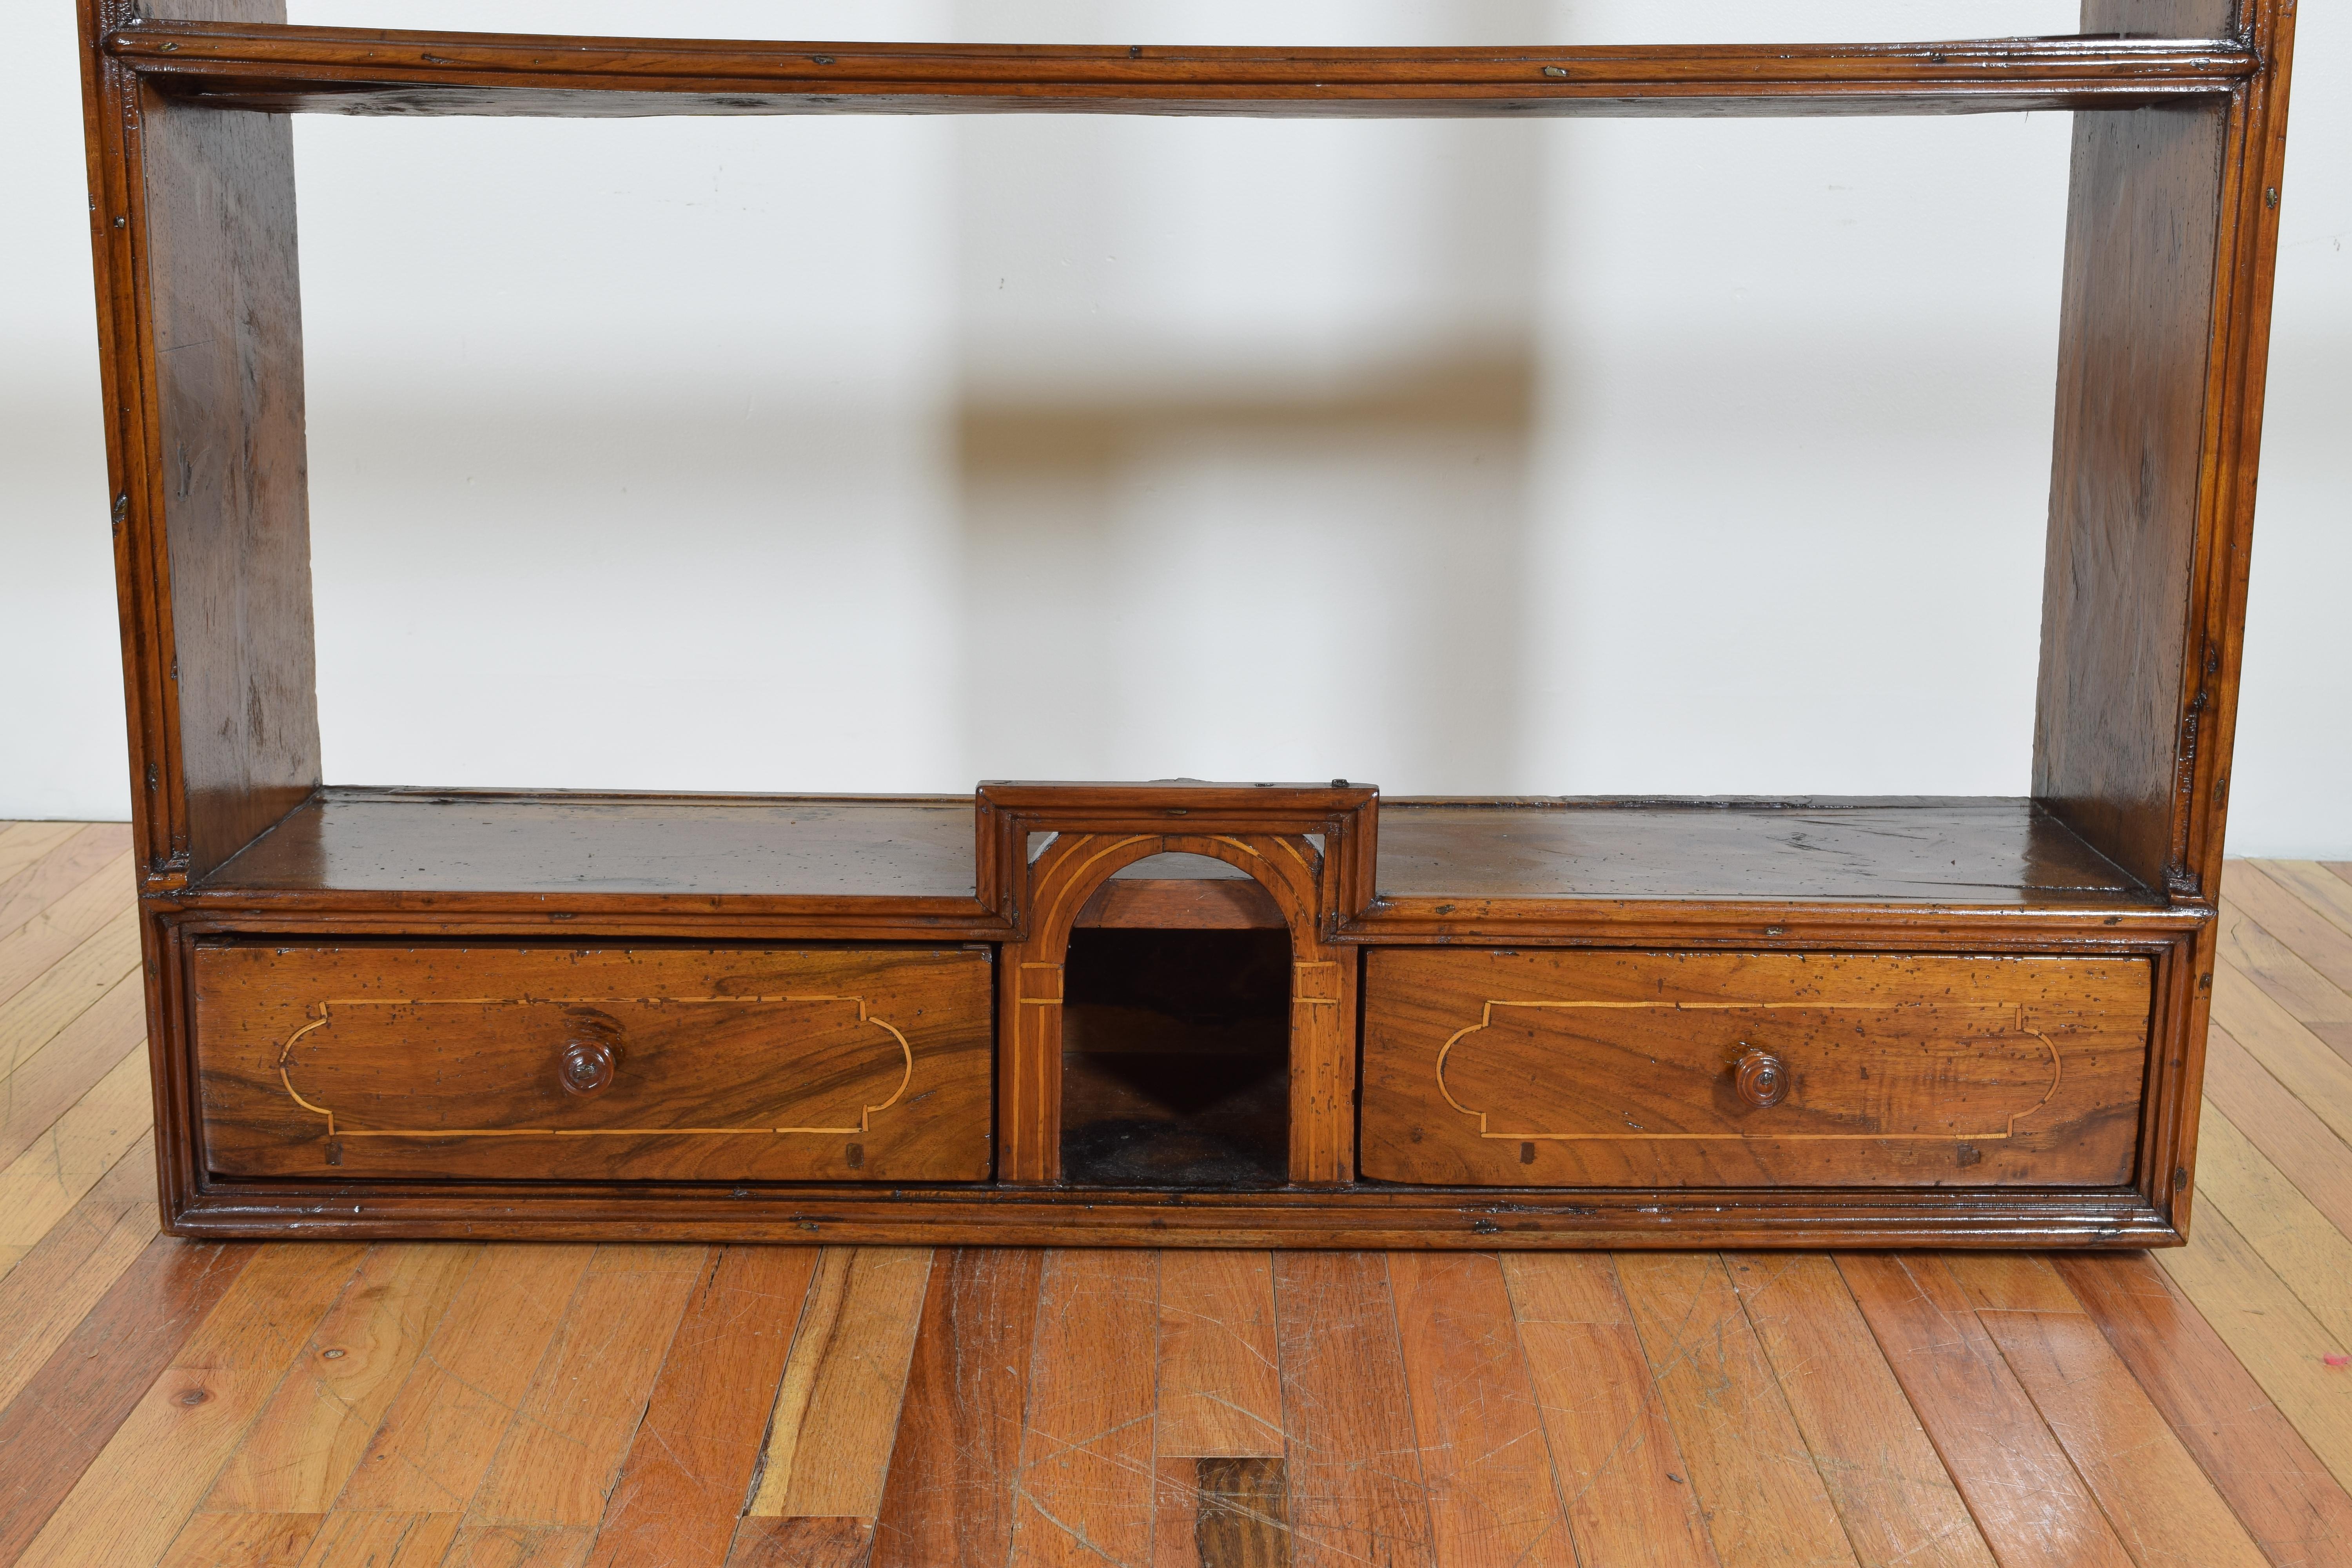 Italian Walnut and Band Inlaid Wall Shelf from the Early 18th Century 1